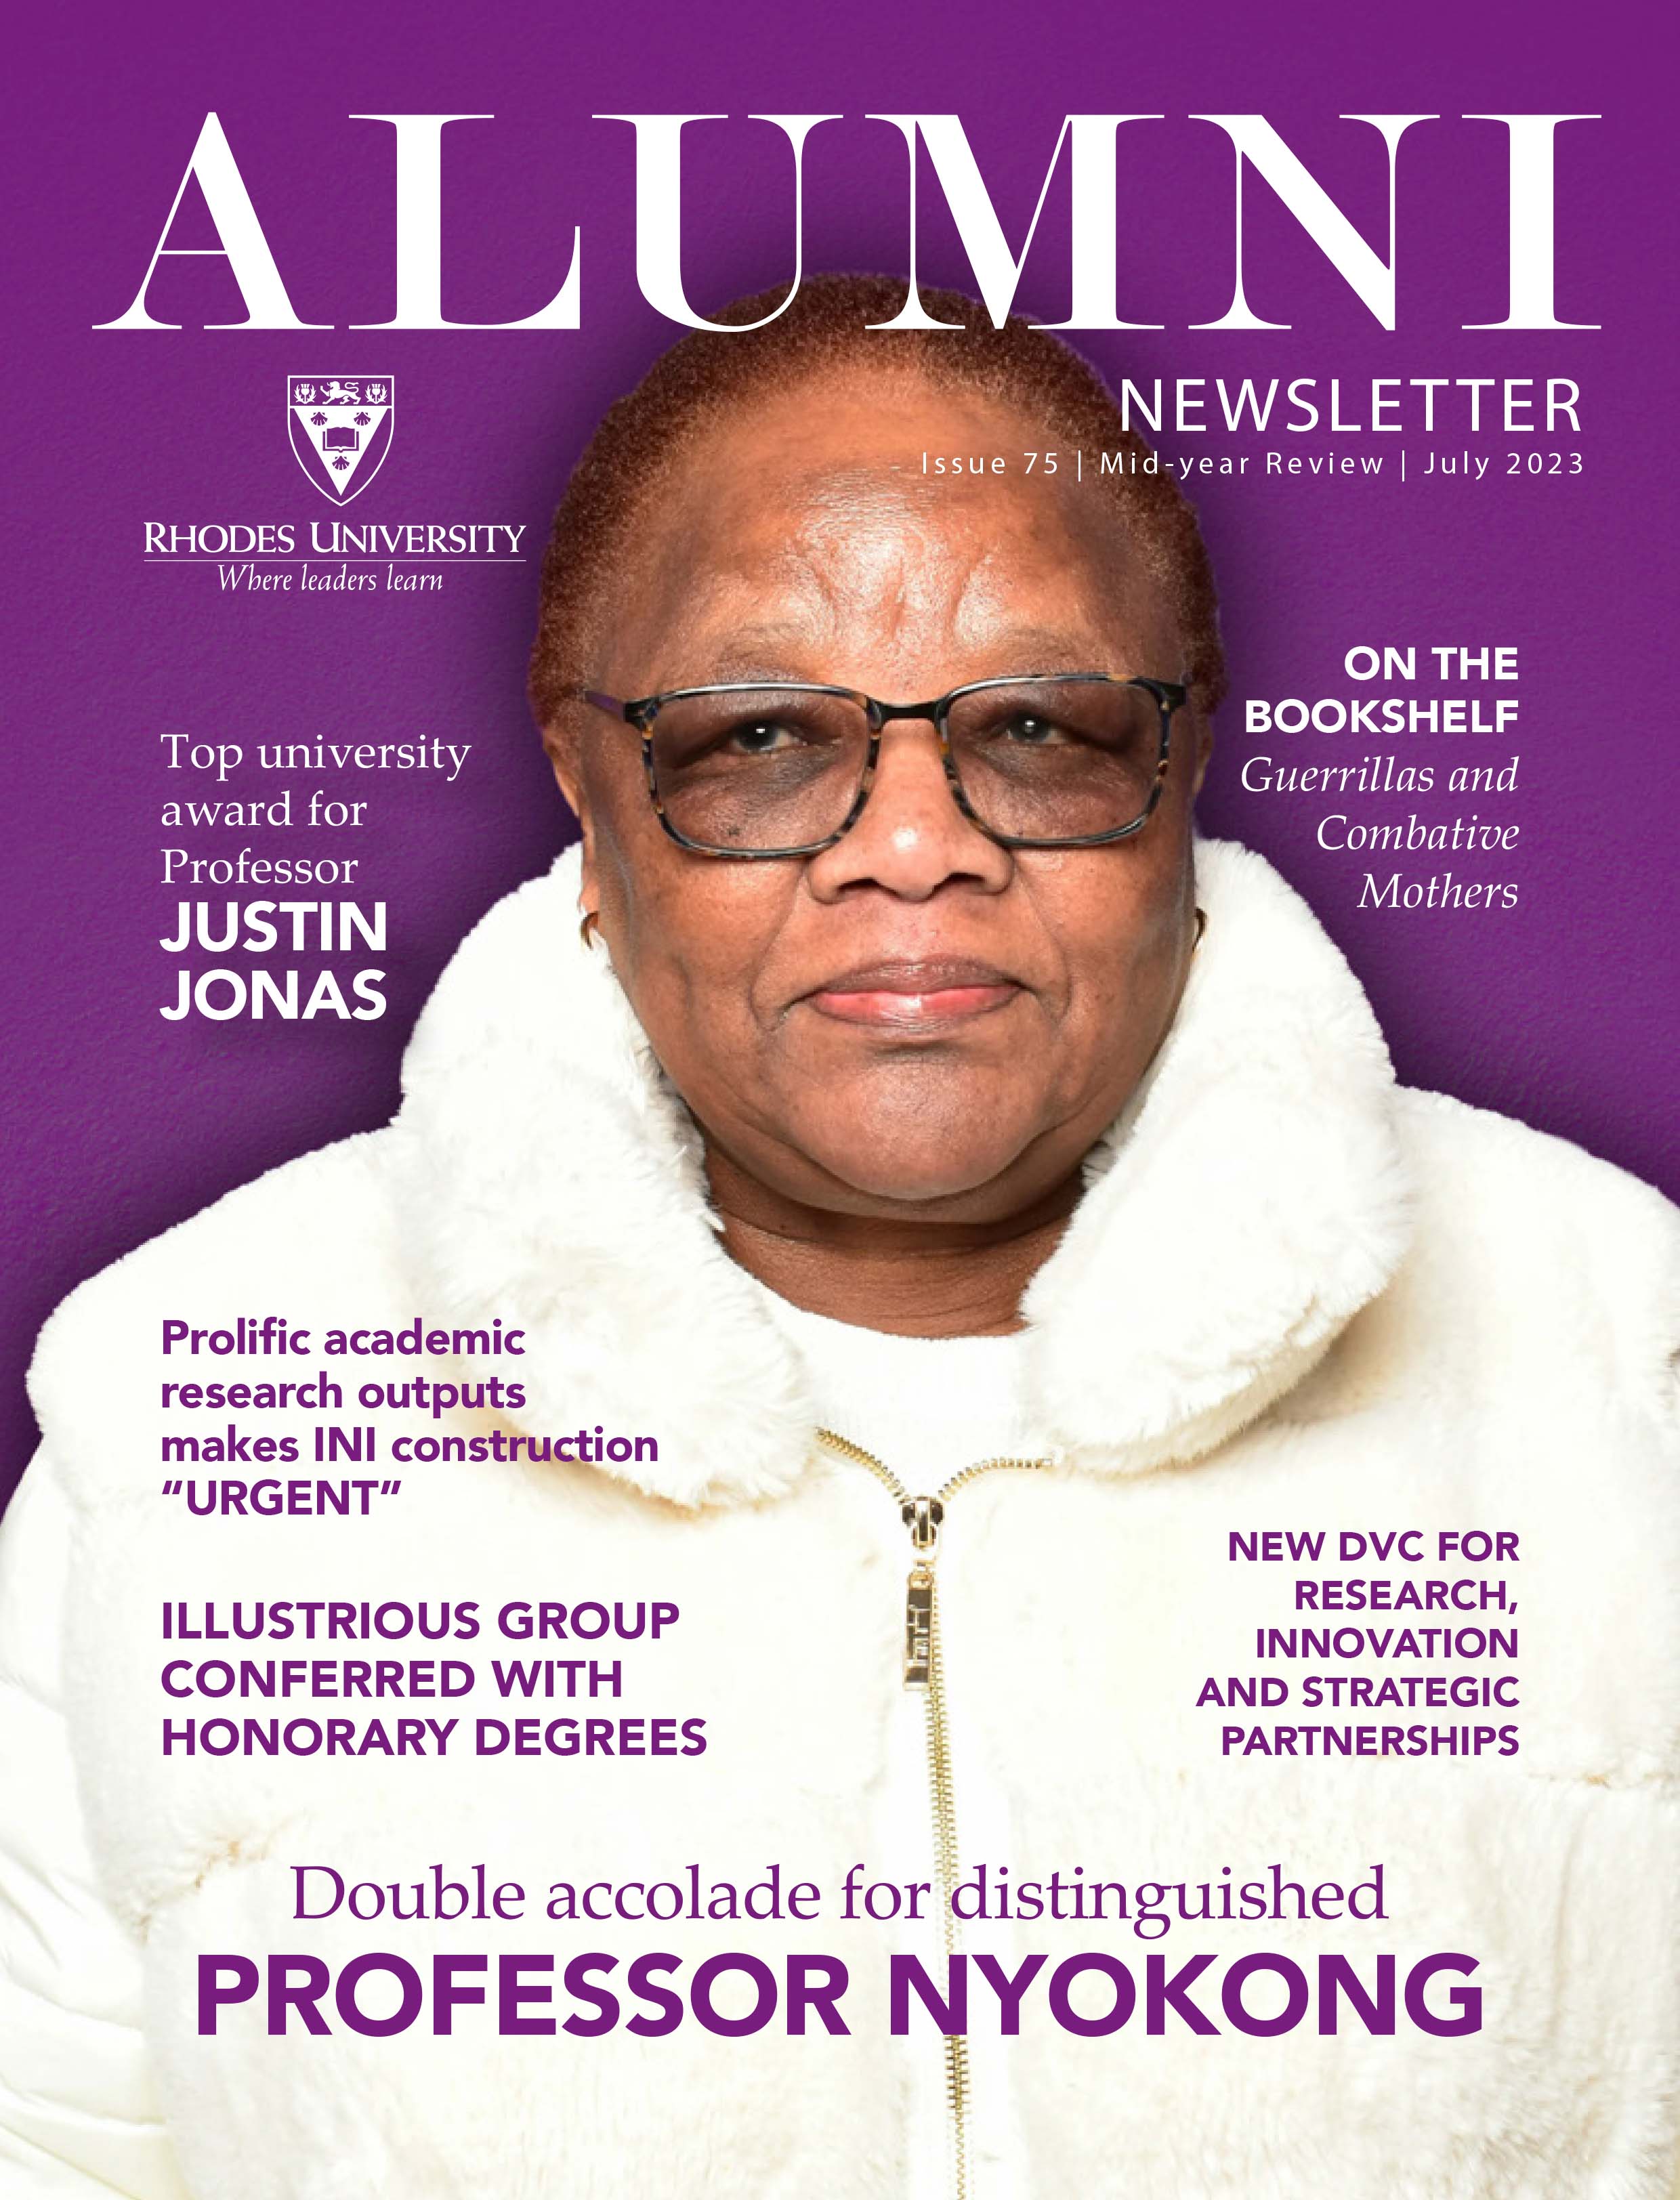 Alumni Newsletter Issue 75 coverpage